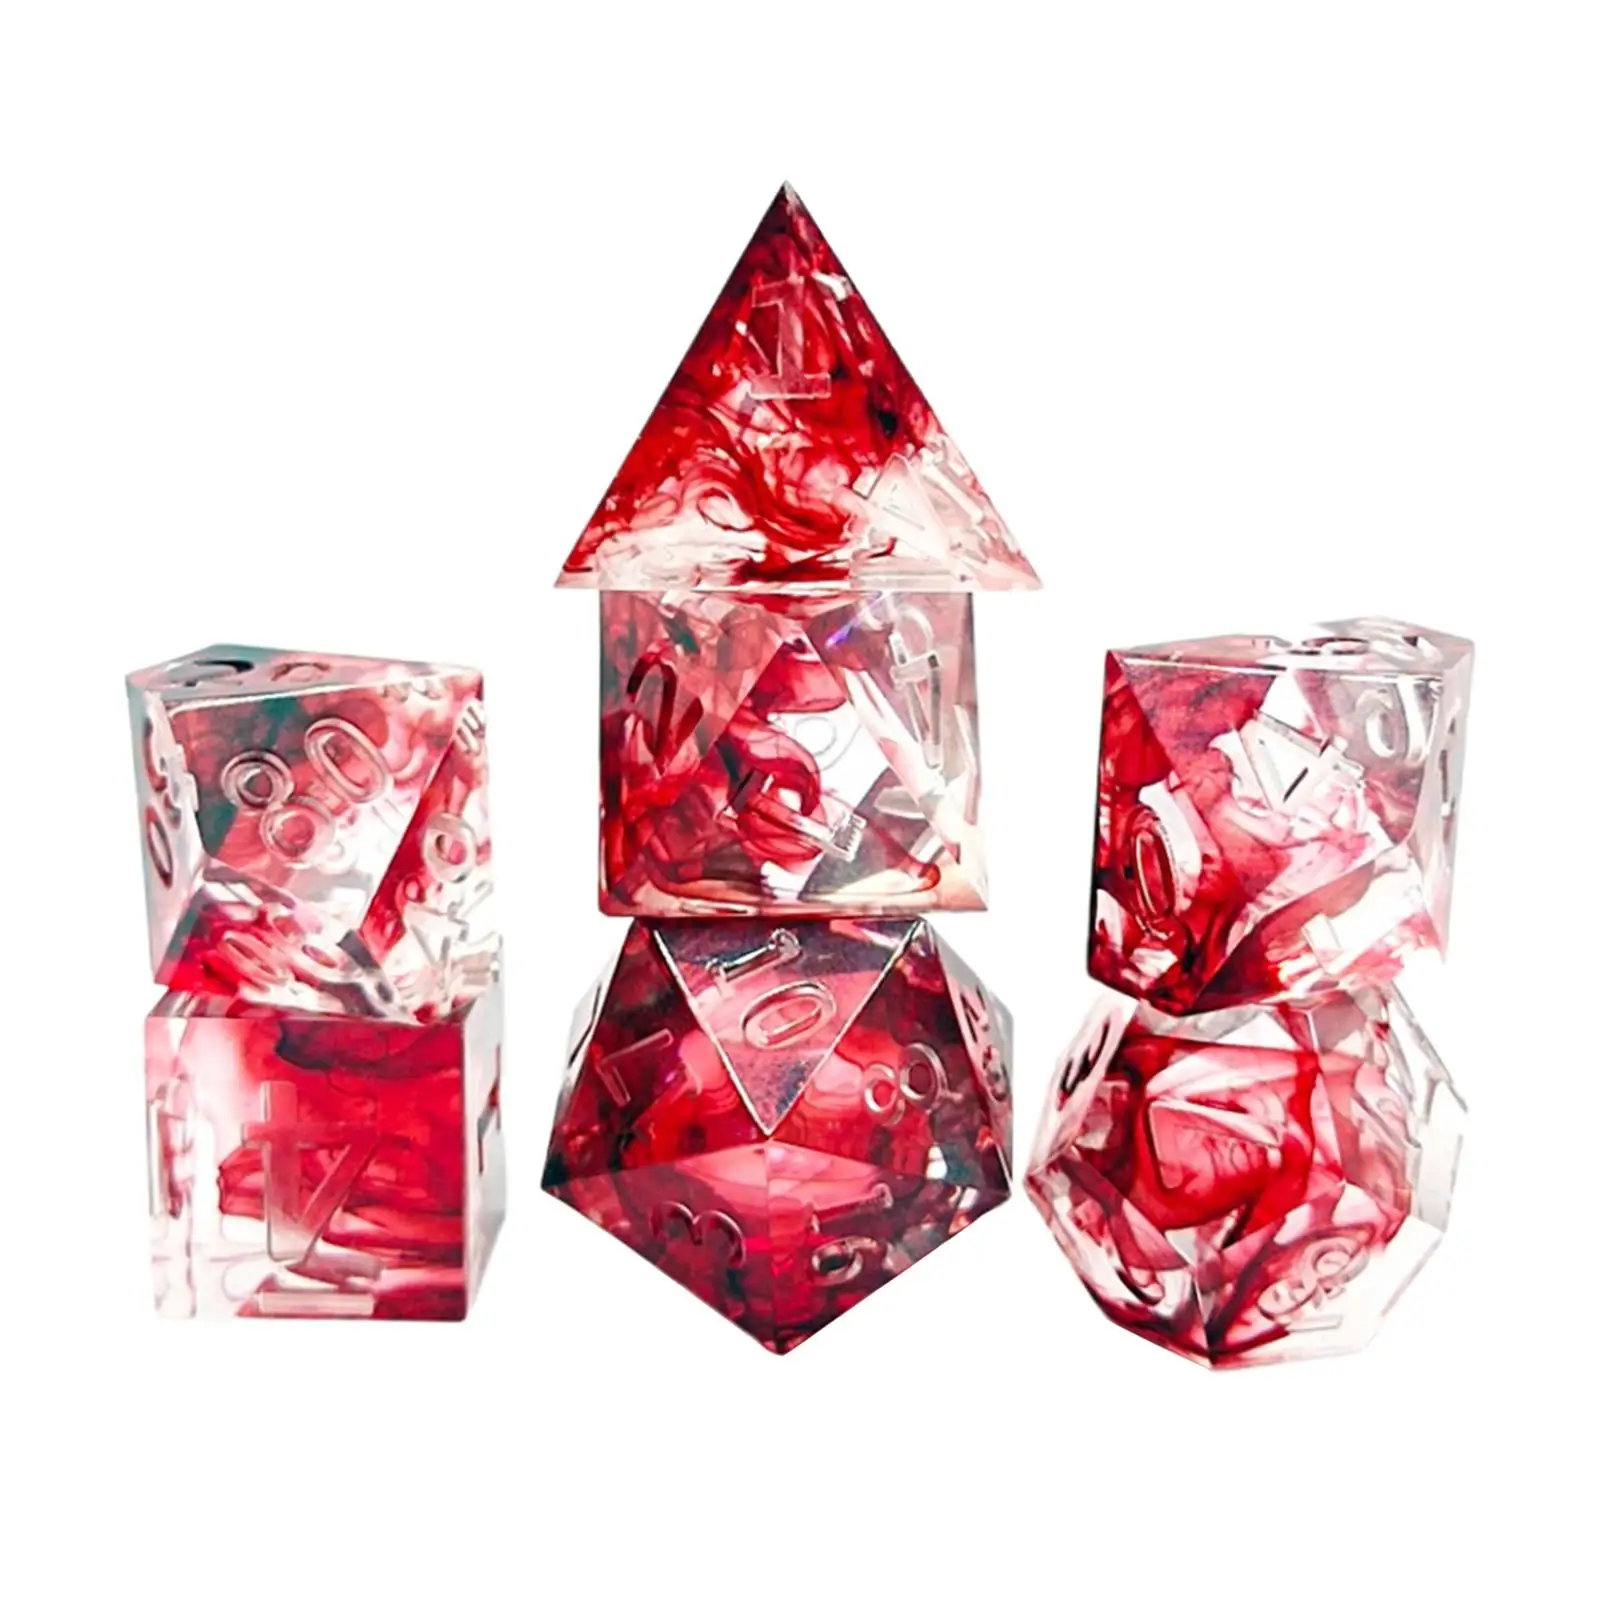 Polyhedral Dice Crystal RPG Blood Effect Red Floating Silk for Card Games